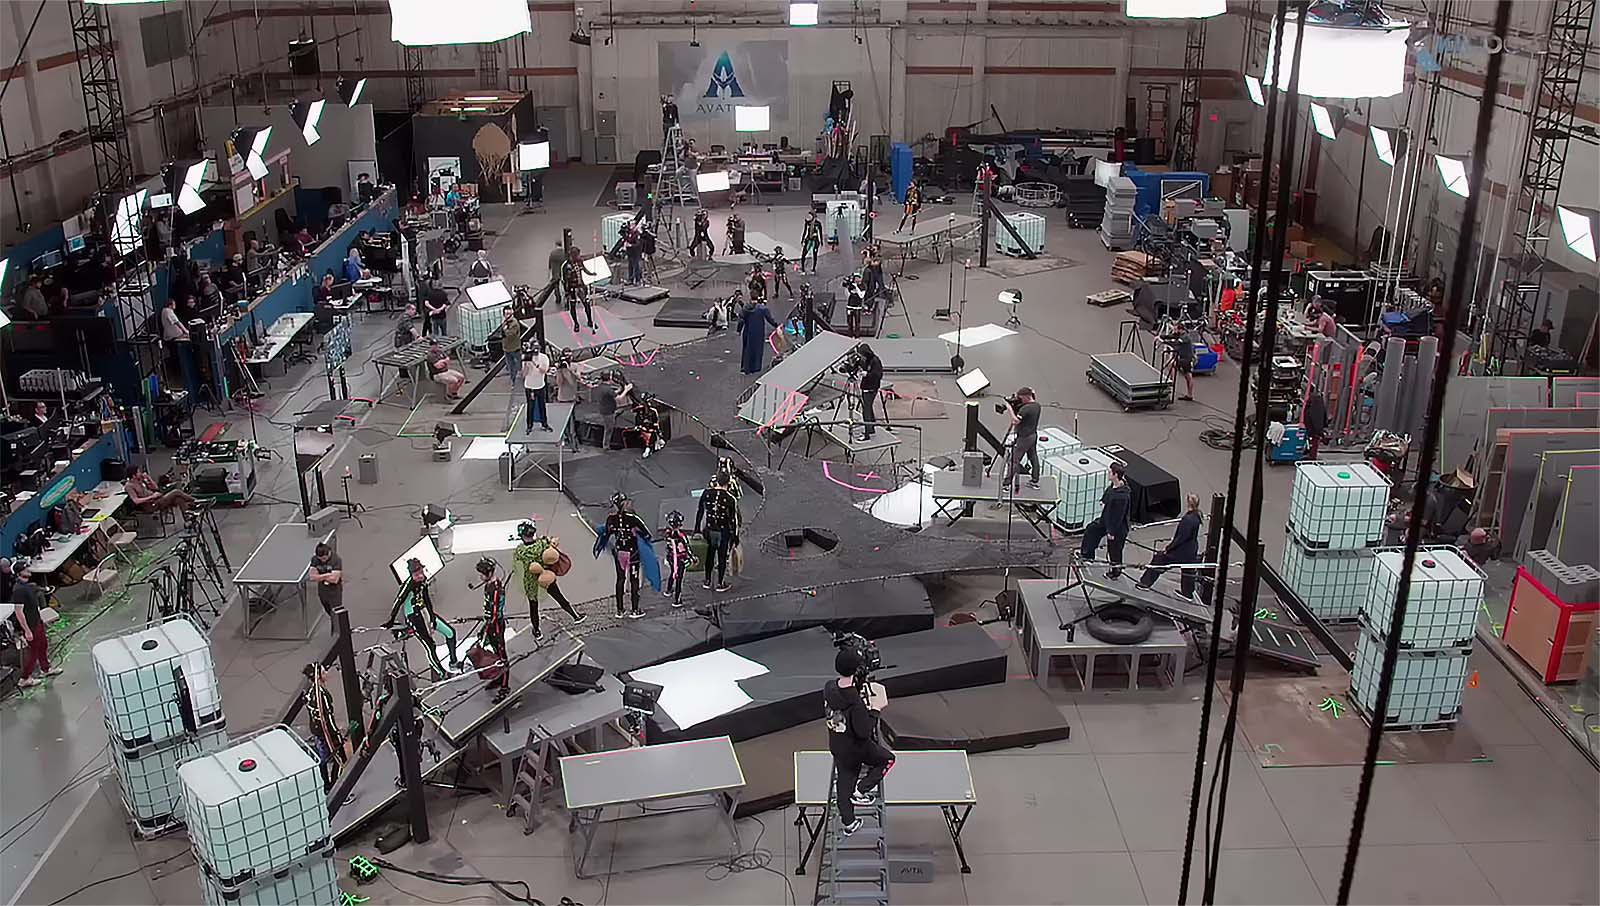 Shooting on the “dry” set for Avatar. Image © Disney